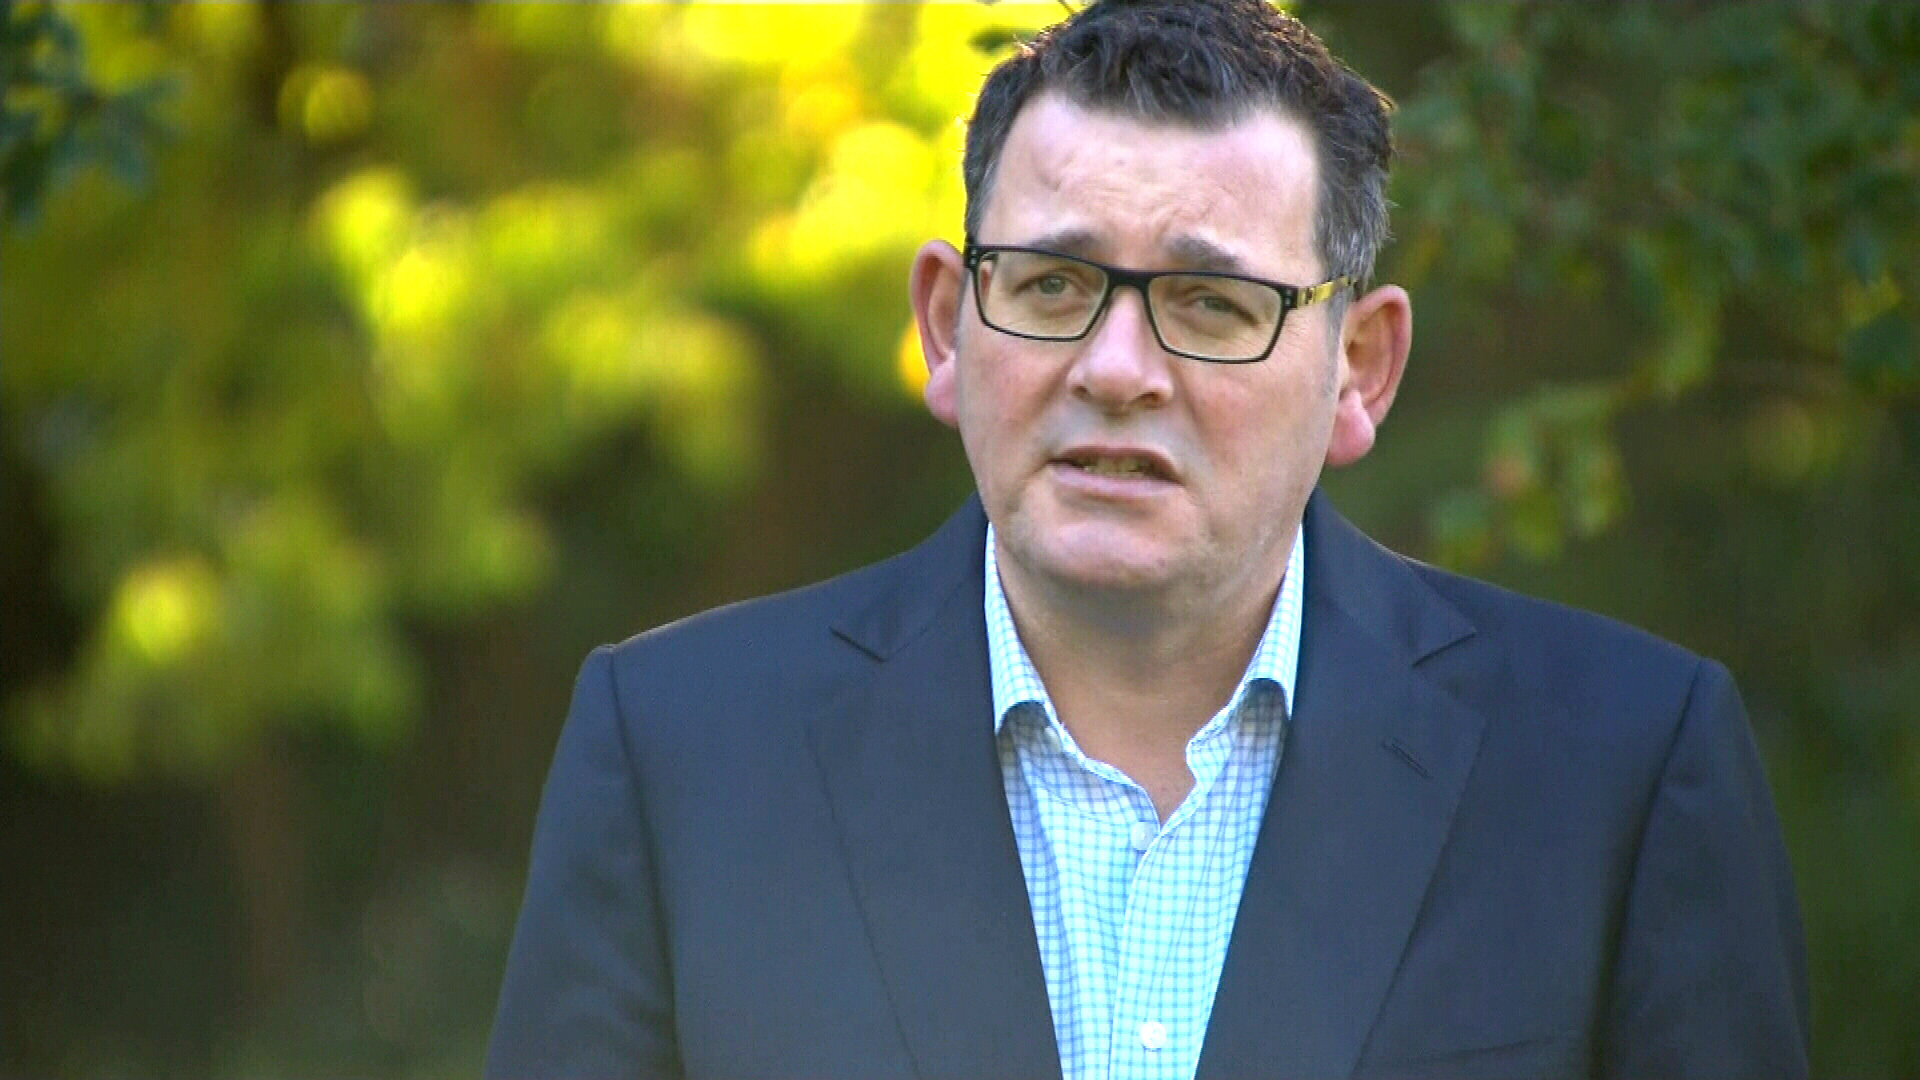 Premier Daniel Andrews said coronavirus cases in Victoria are nearing 700. Victoria Police have been bestowed with the power to slug individuals and businesses with fines for flouting social distancing measures